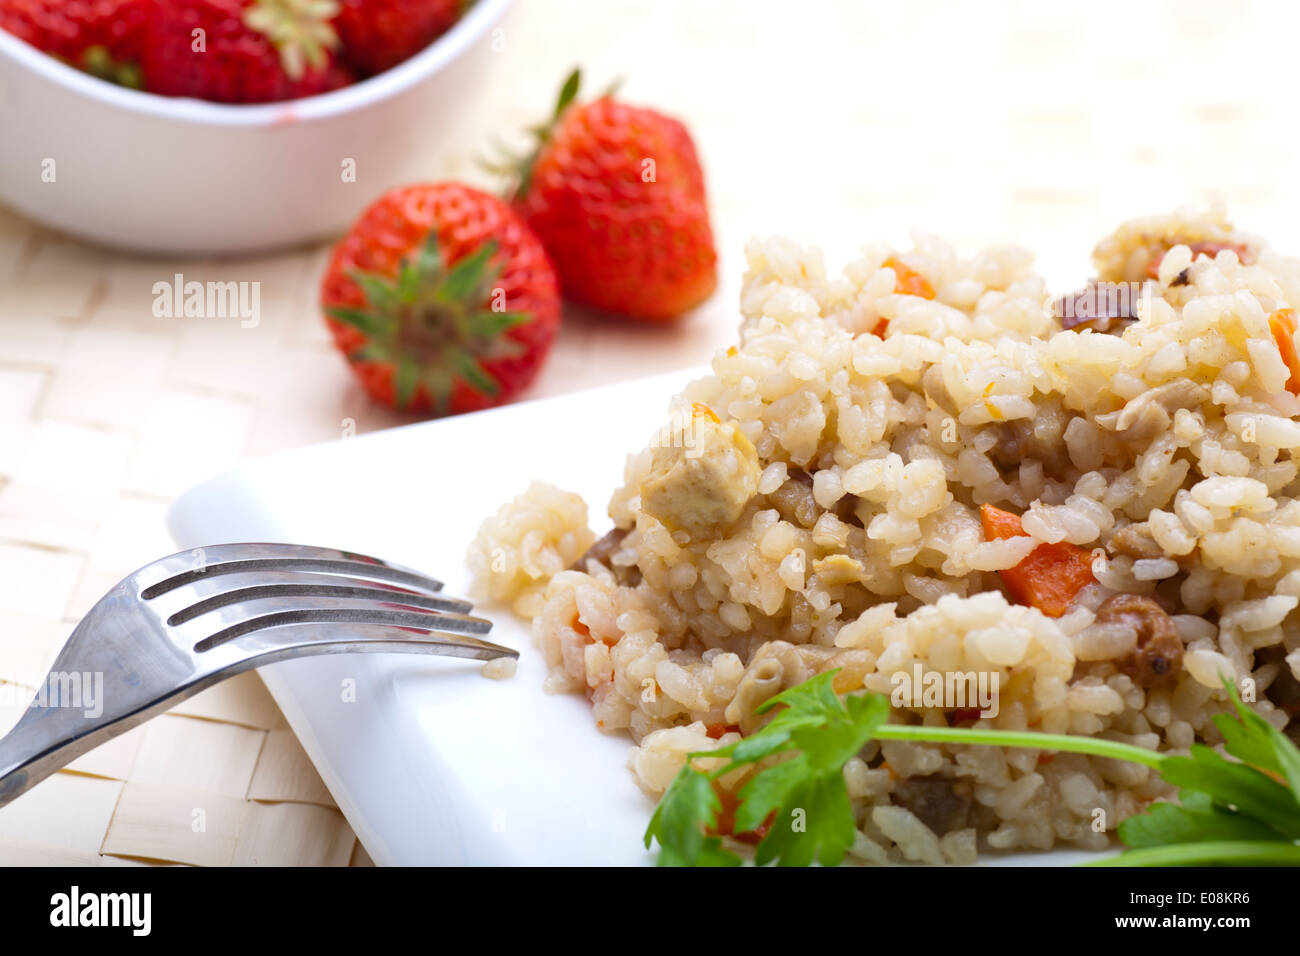 A plate of fried rice Stock Photo